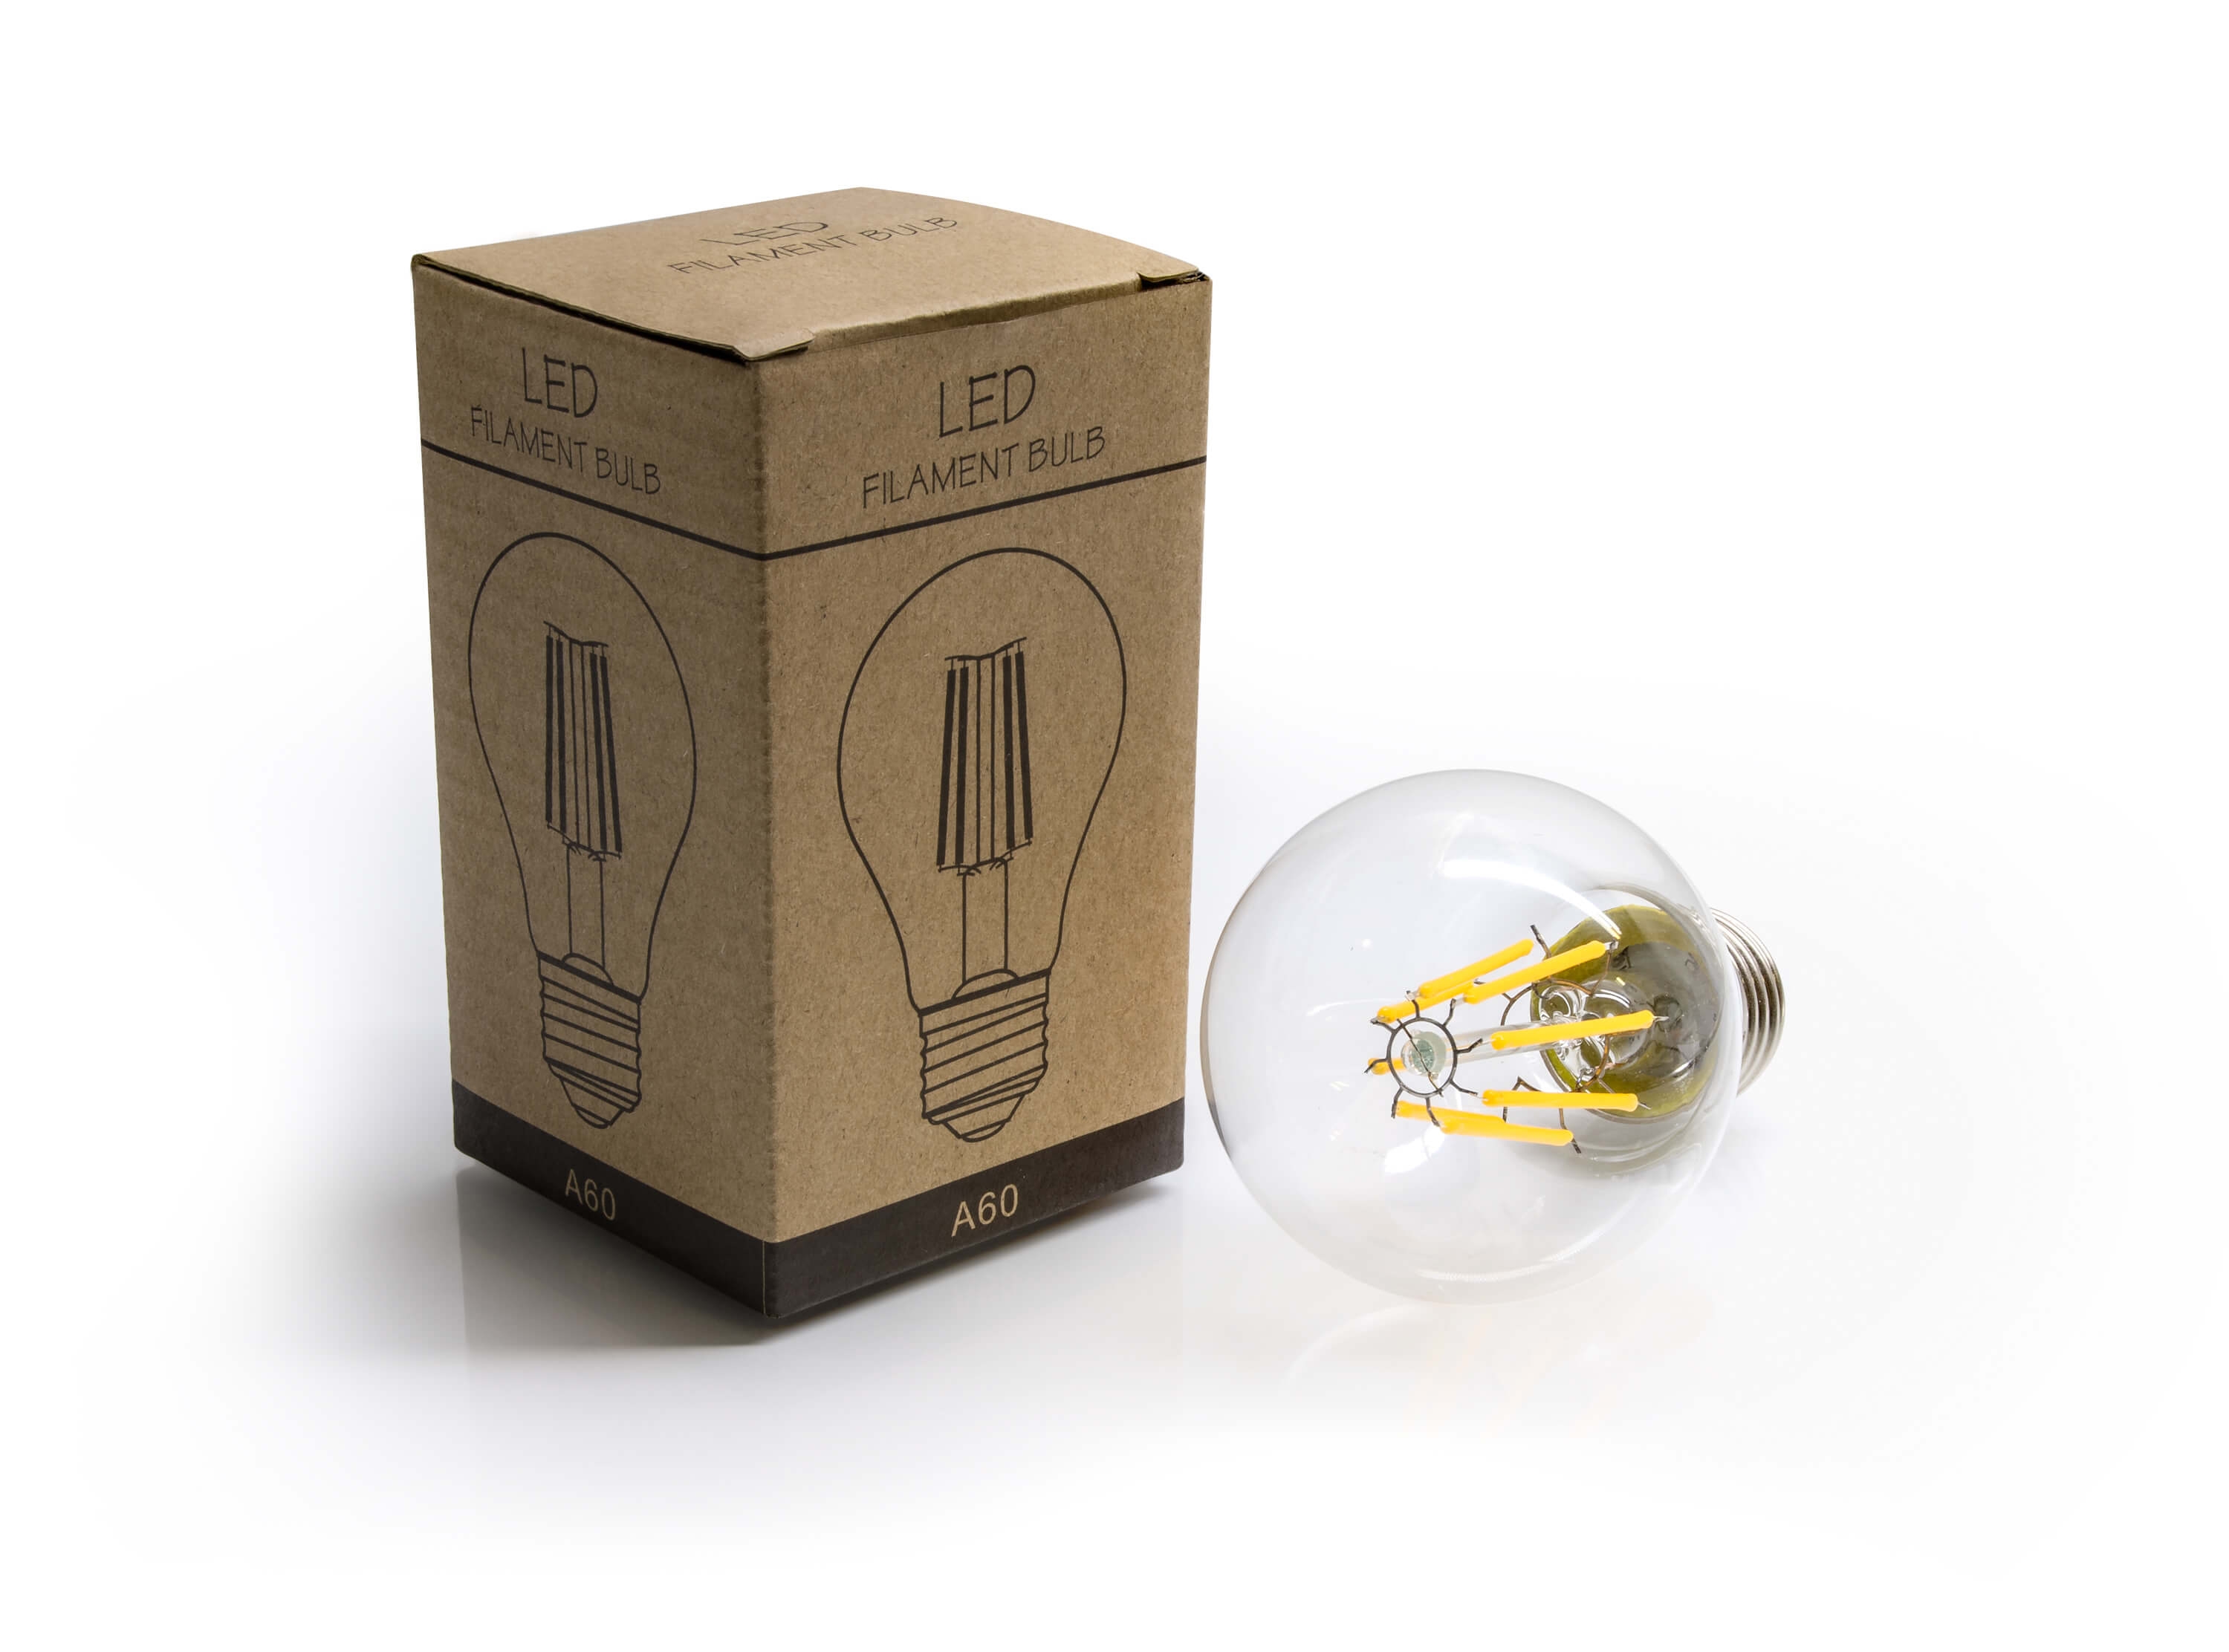 /8/w/8w-led-filament-lampe-e27-a60-mit-packung_1.jpg